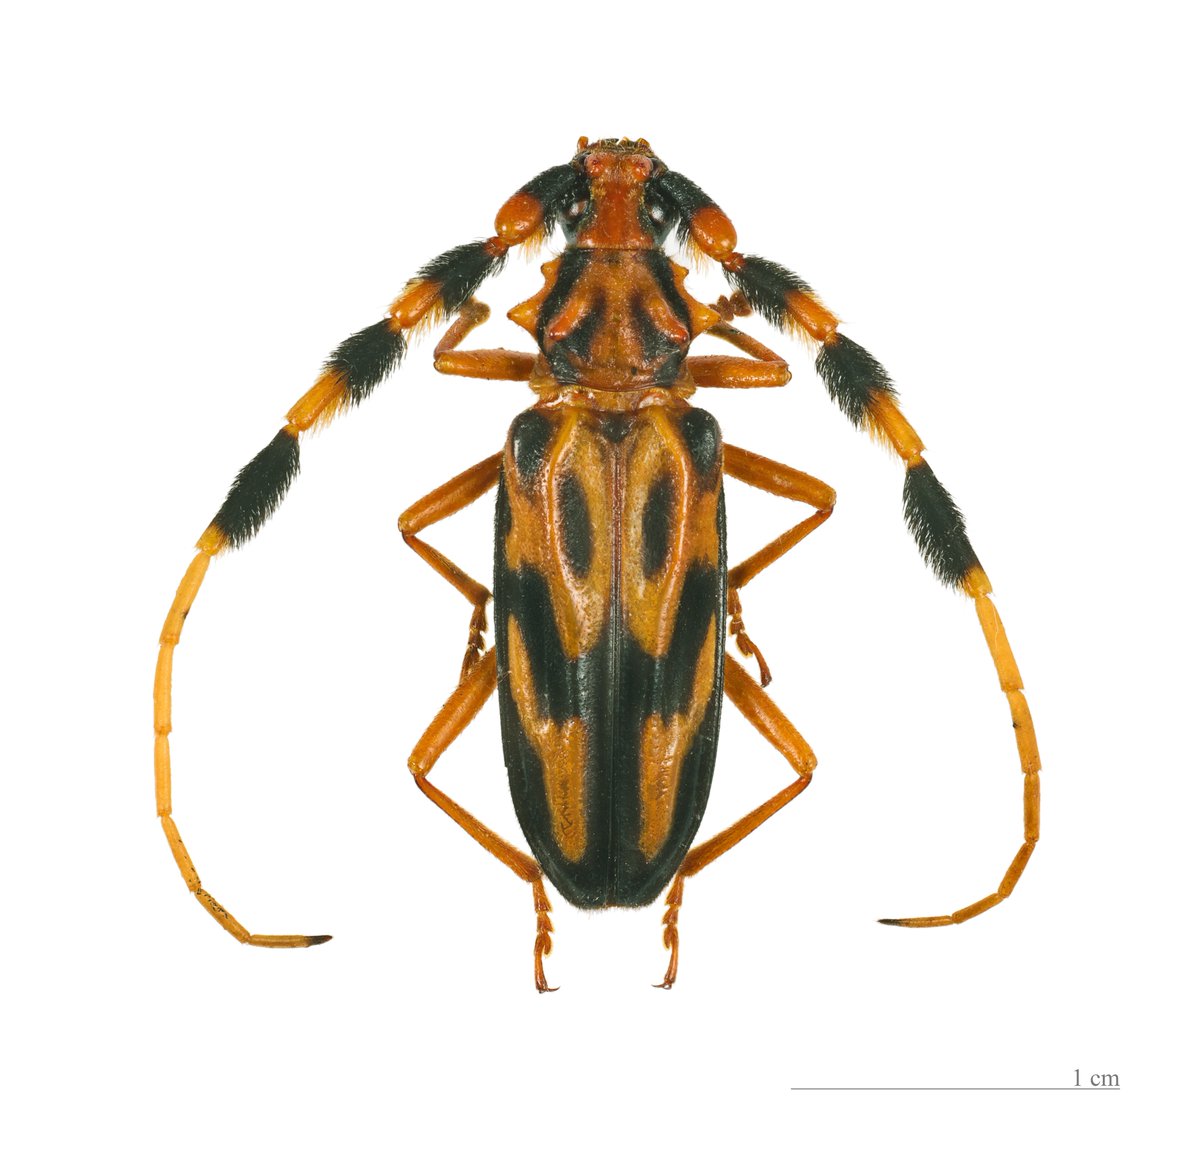 Thank you for the fun #Science Deep Dive Saturday! We discussed fishhook ants and long horn asian beetles--behavior, epigenetics, invasiveness and more! Thank you @tba_listenhear @AstroCanuck @itsjimmyb93 @Kaylar_SoG for the raids! We passed the love to @Finamenon!